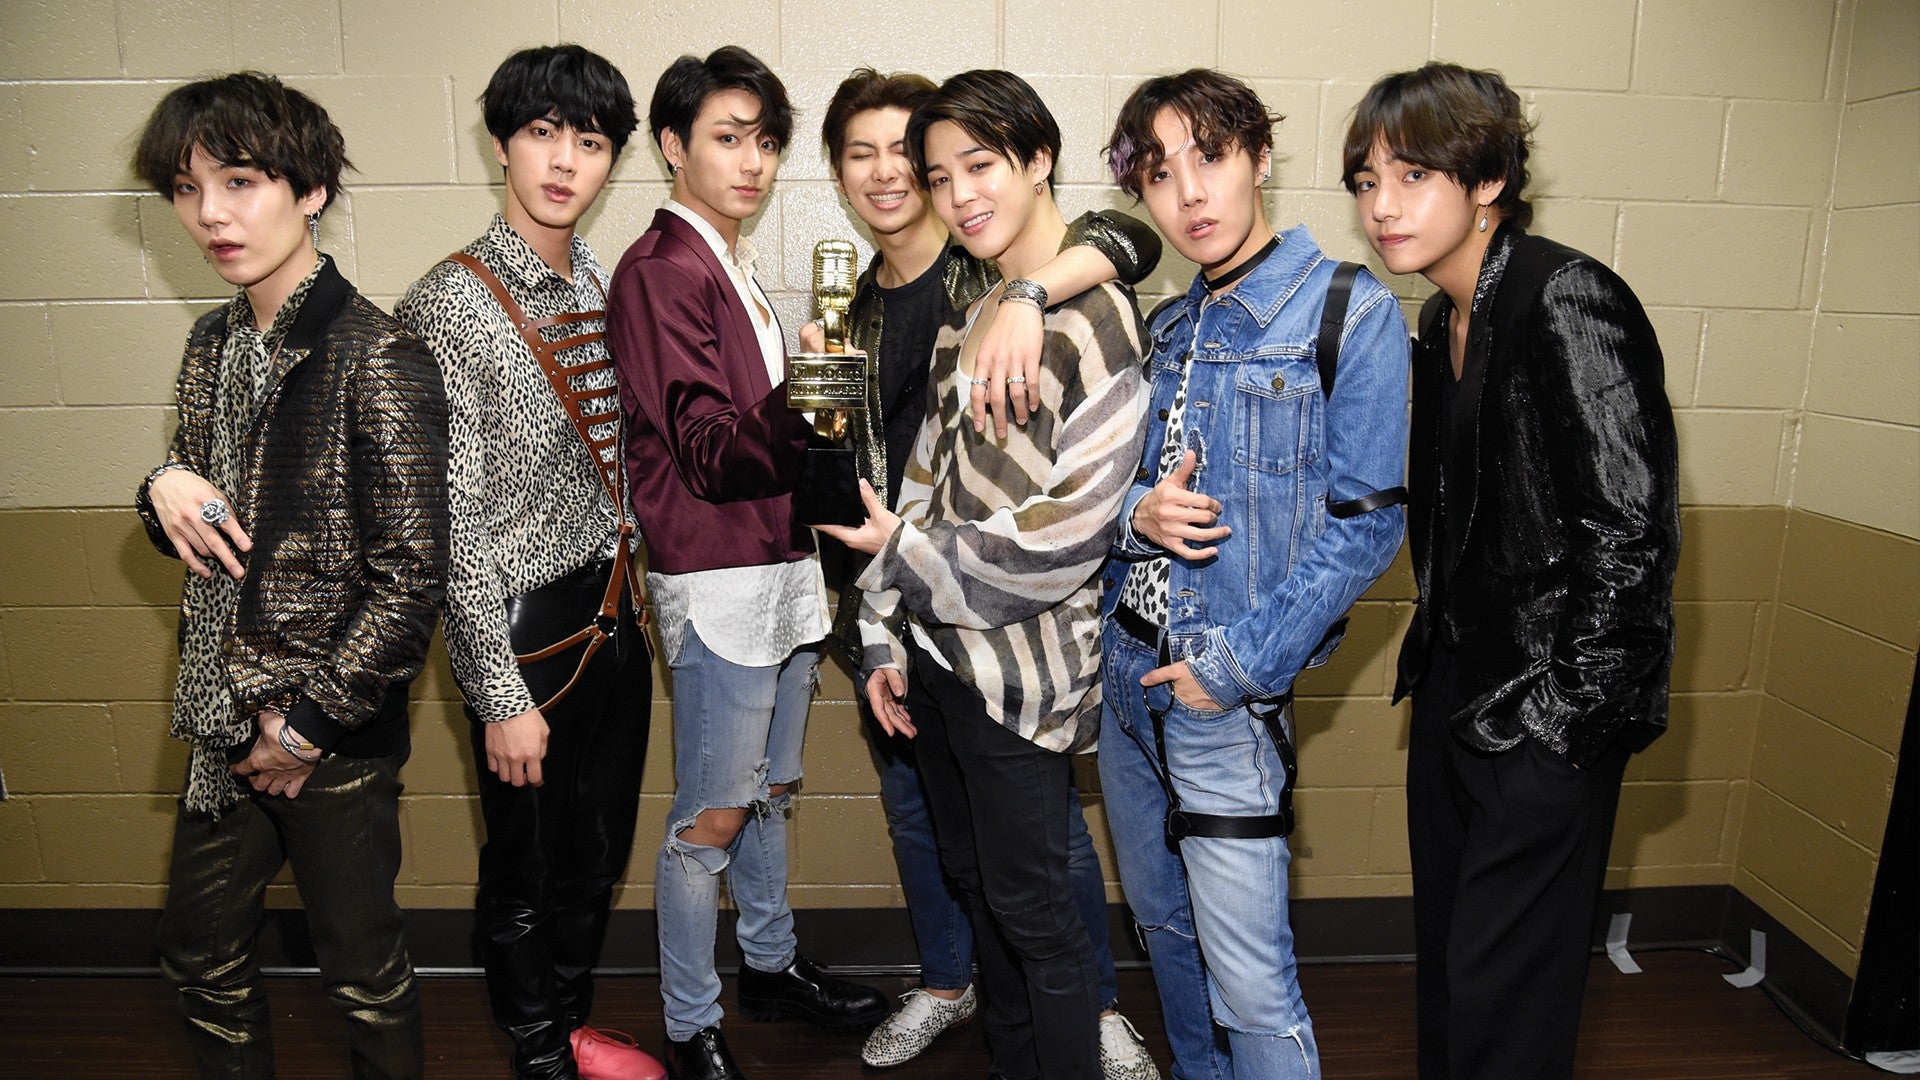 Bts Goes All Out During Tv Performance Debut Of New Single Fake Love At 2018 Billboard Music Awards Entertainment Tonight - bts fake love song roblox id bts